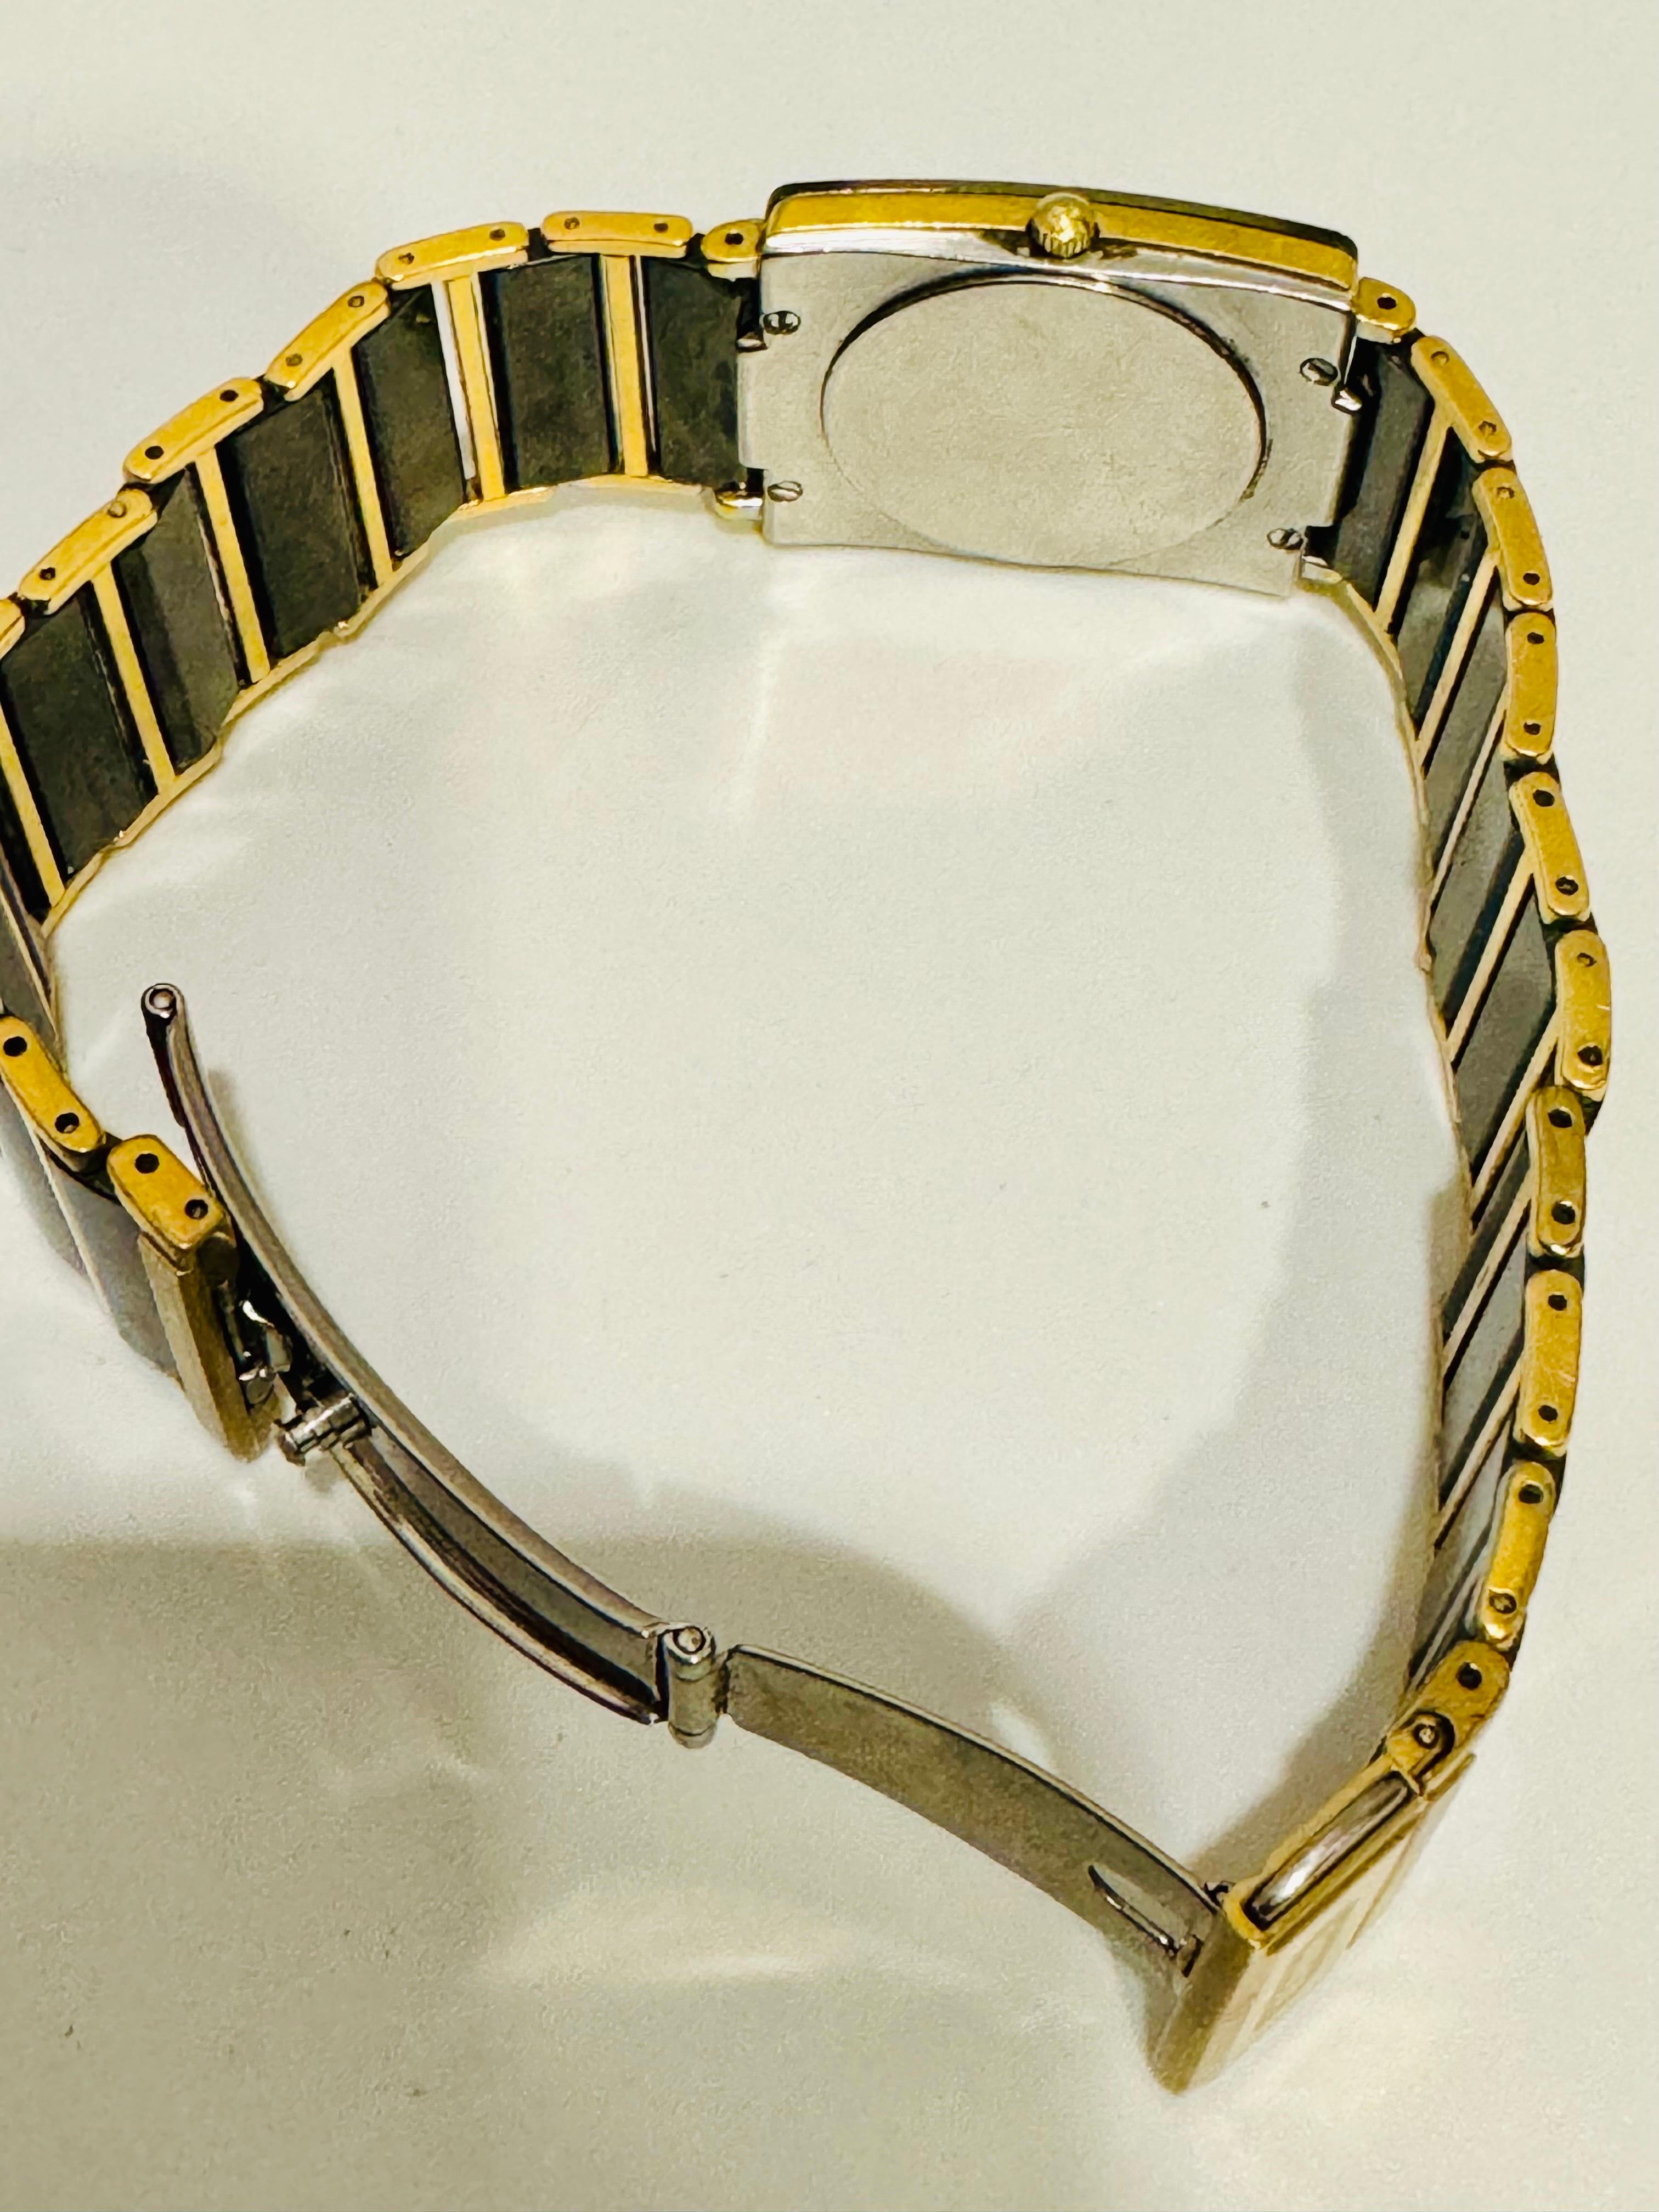 Unisex 
RADO® Watch 
 SCRATCH-PROOF WATER-SEALED BRACELET LINKS IN MICH- TECH CERAMICS
Rectangle
Ceramic
Water Sealed
Black, Gold
-DIA STAR- Pre-owned. An item that has been used previously. The item may

have some signs of cosmetic wear, but is